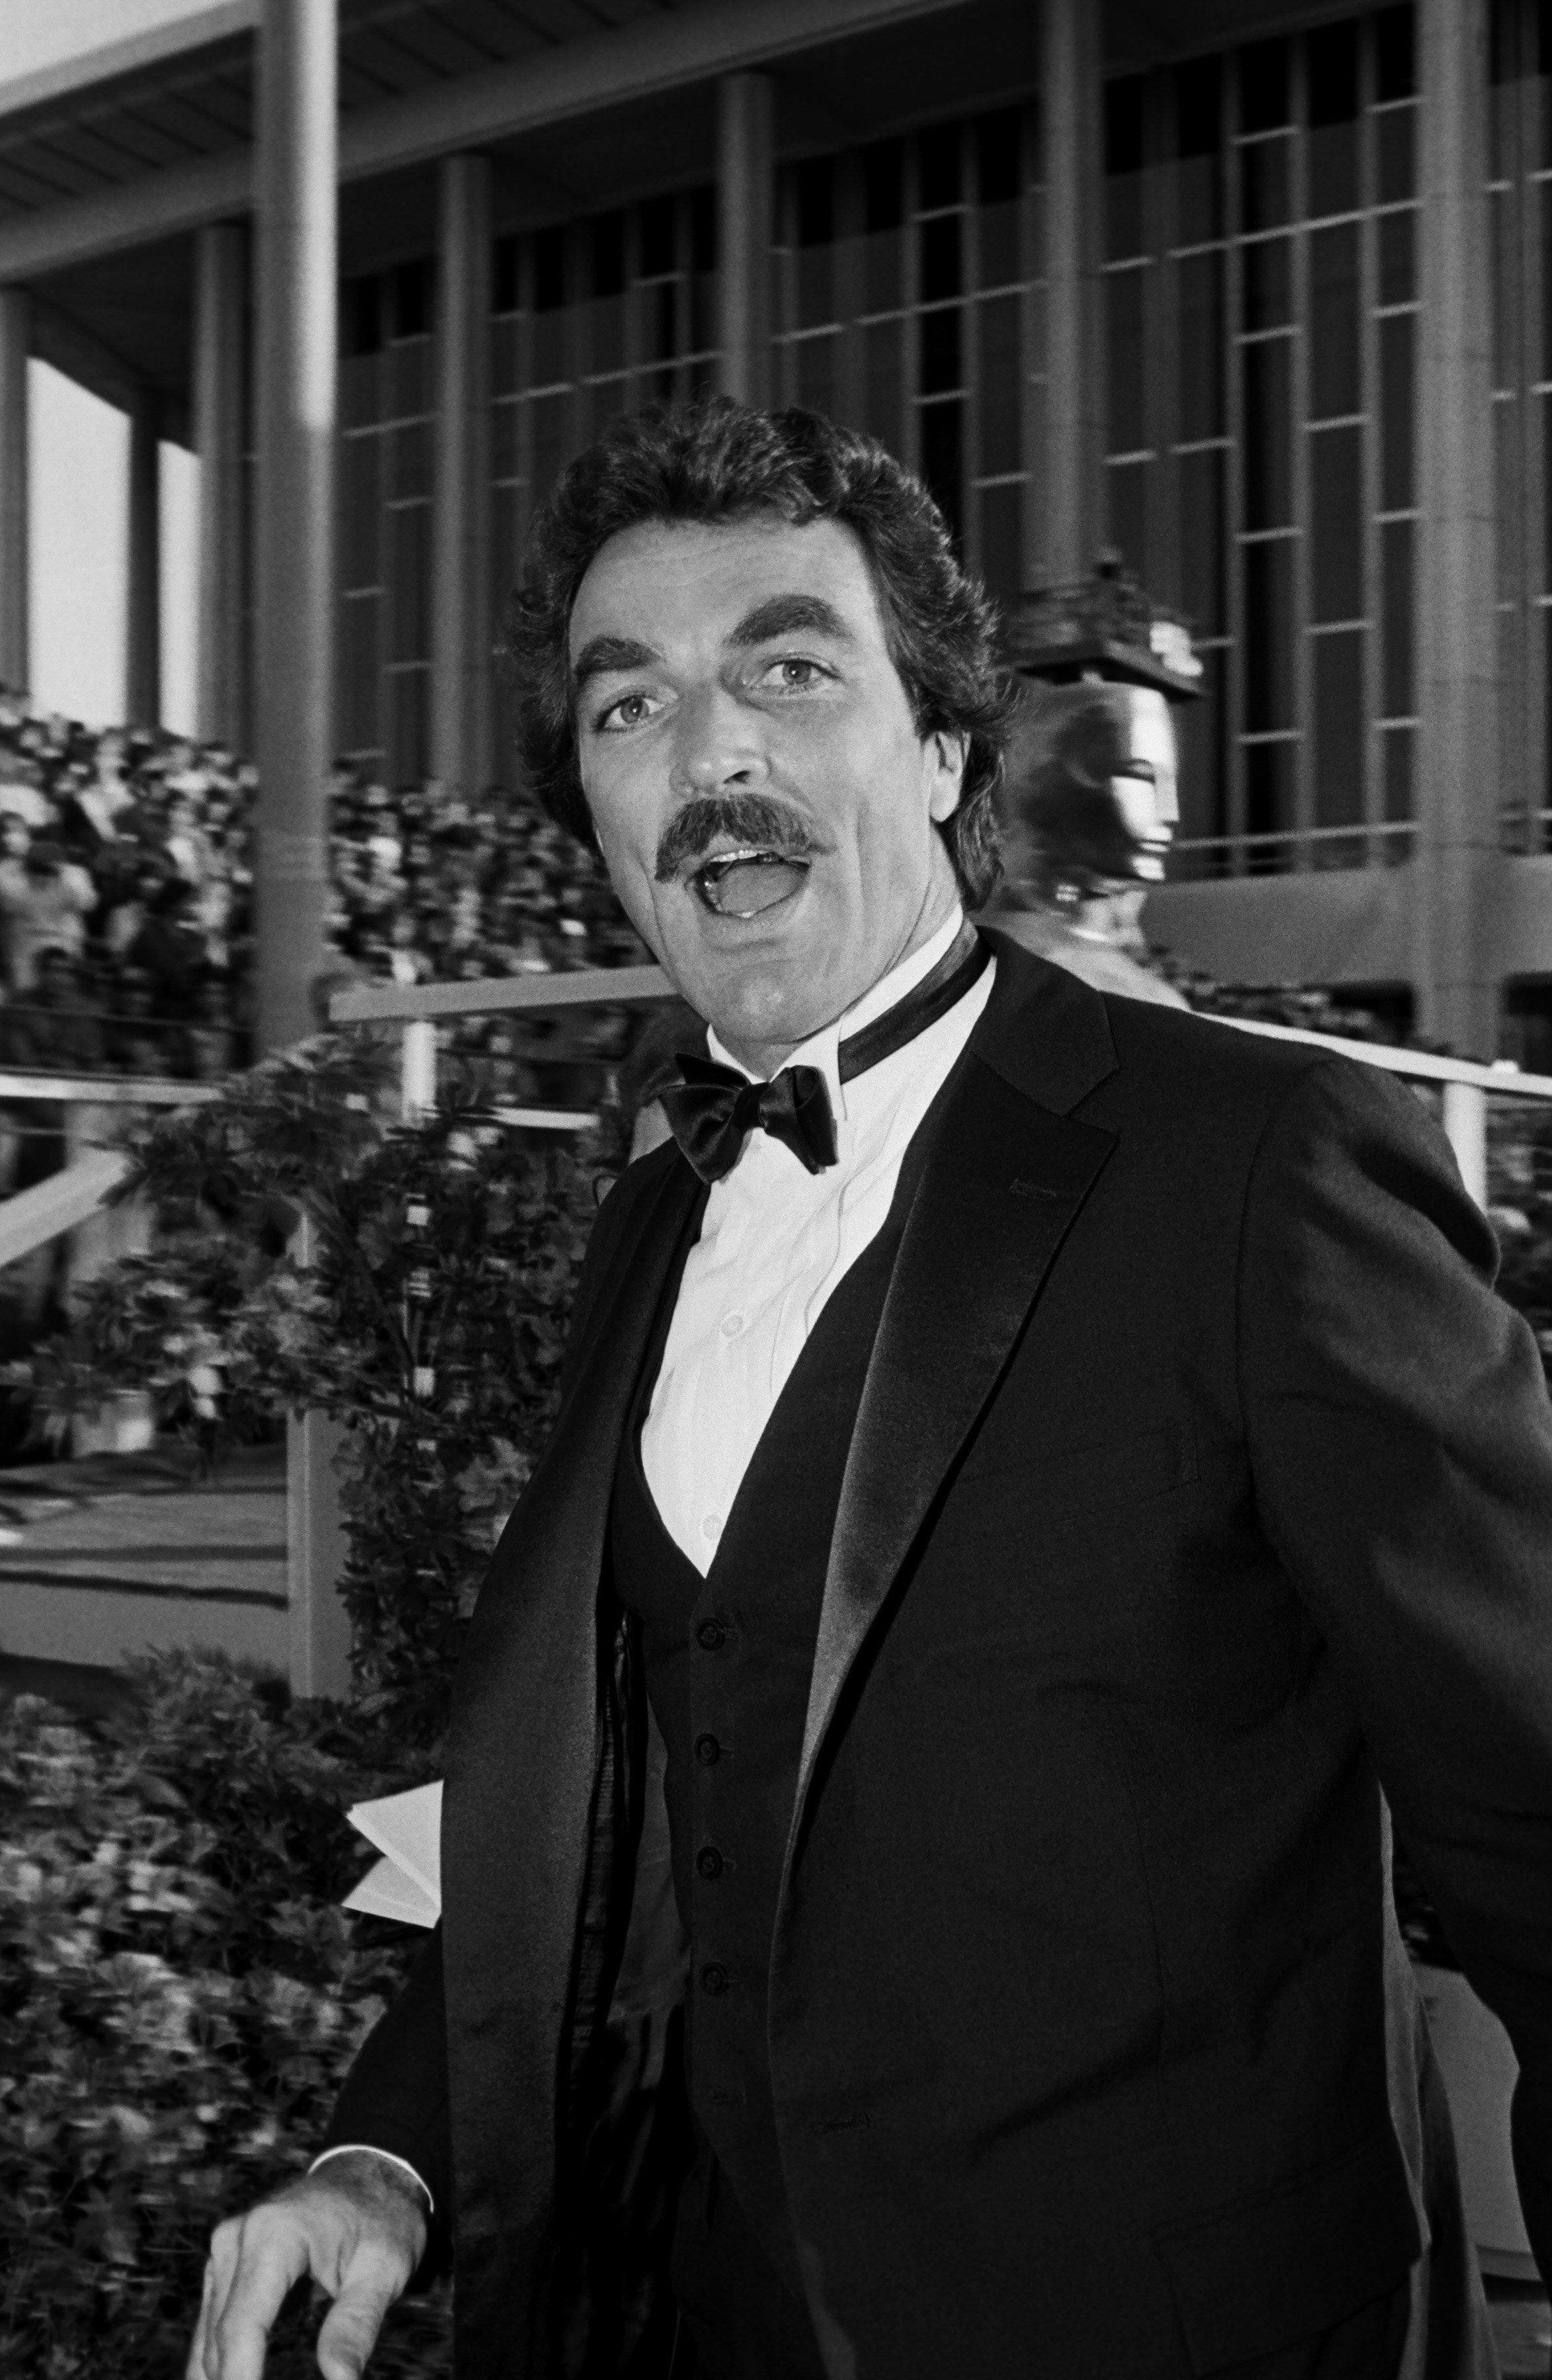 Emmy Award-winning actor, Tom Selleck,on the red carpet during the 1983 Academy Awards | Source: Getty Images